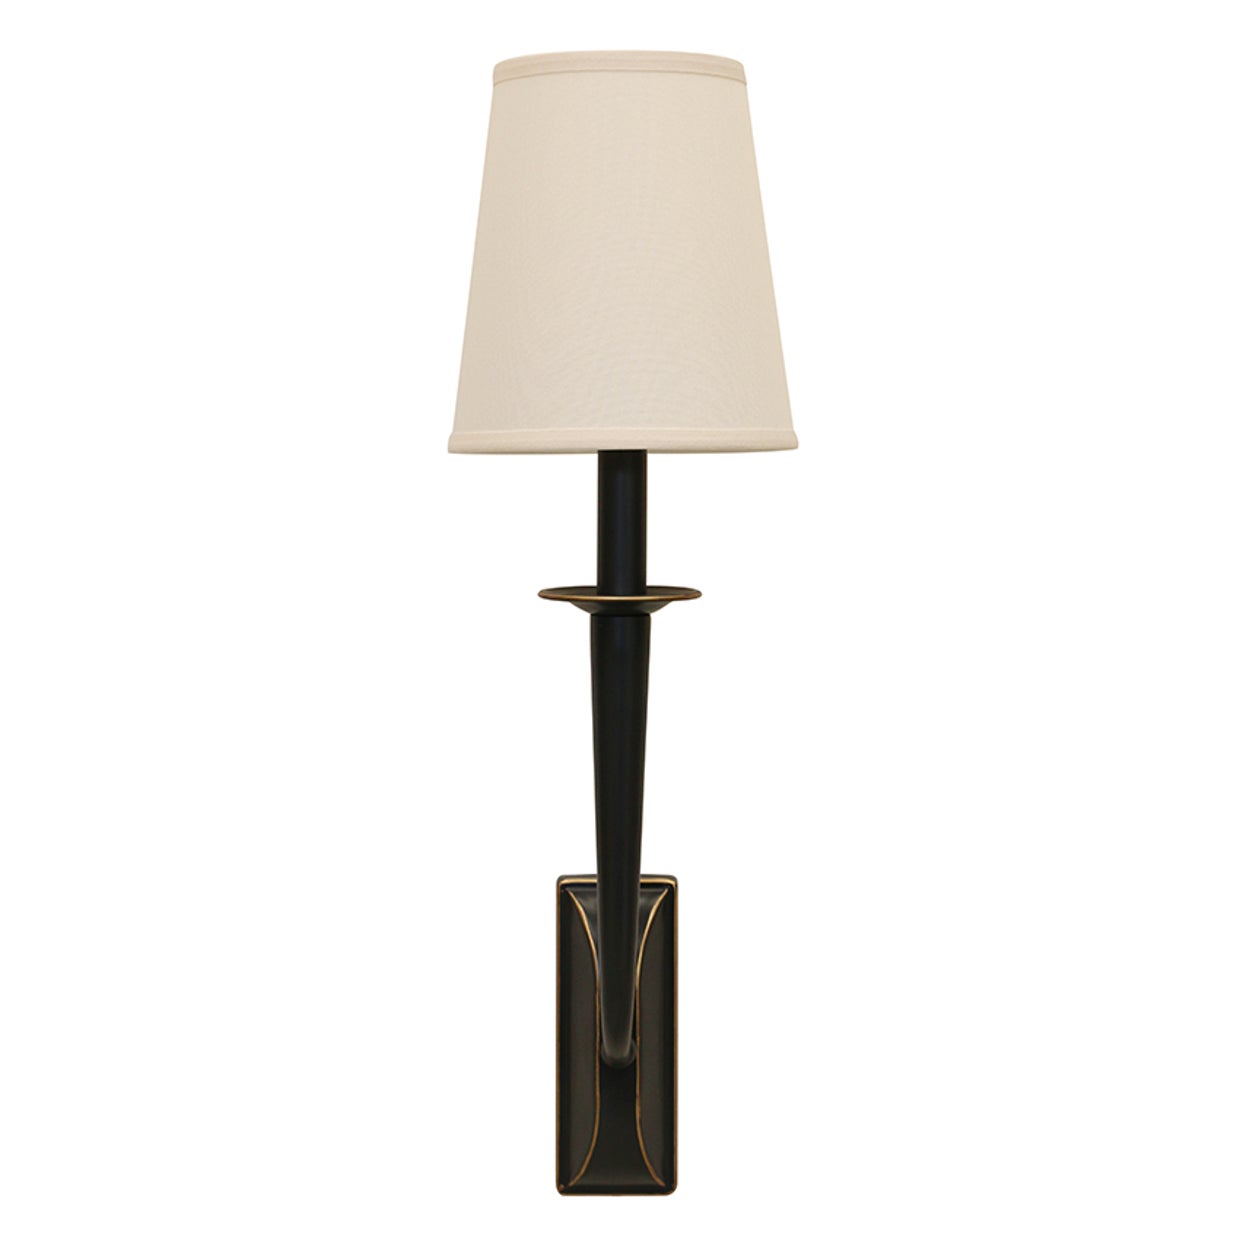 Manhattan Wall Sconce in Antique Black with Shade